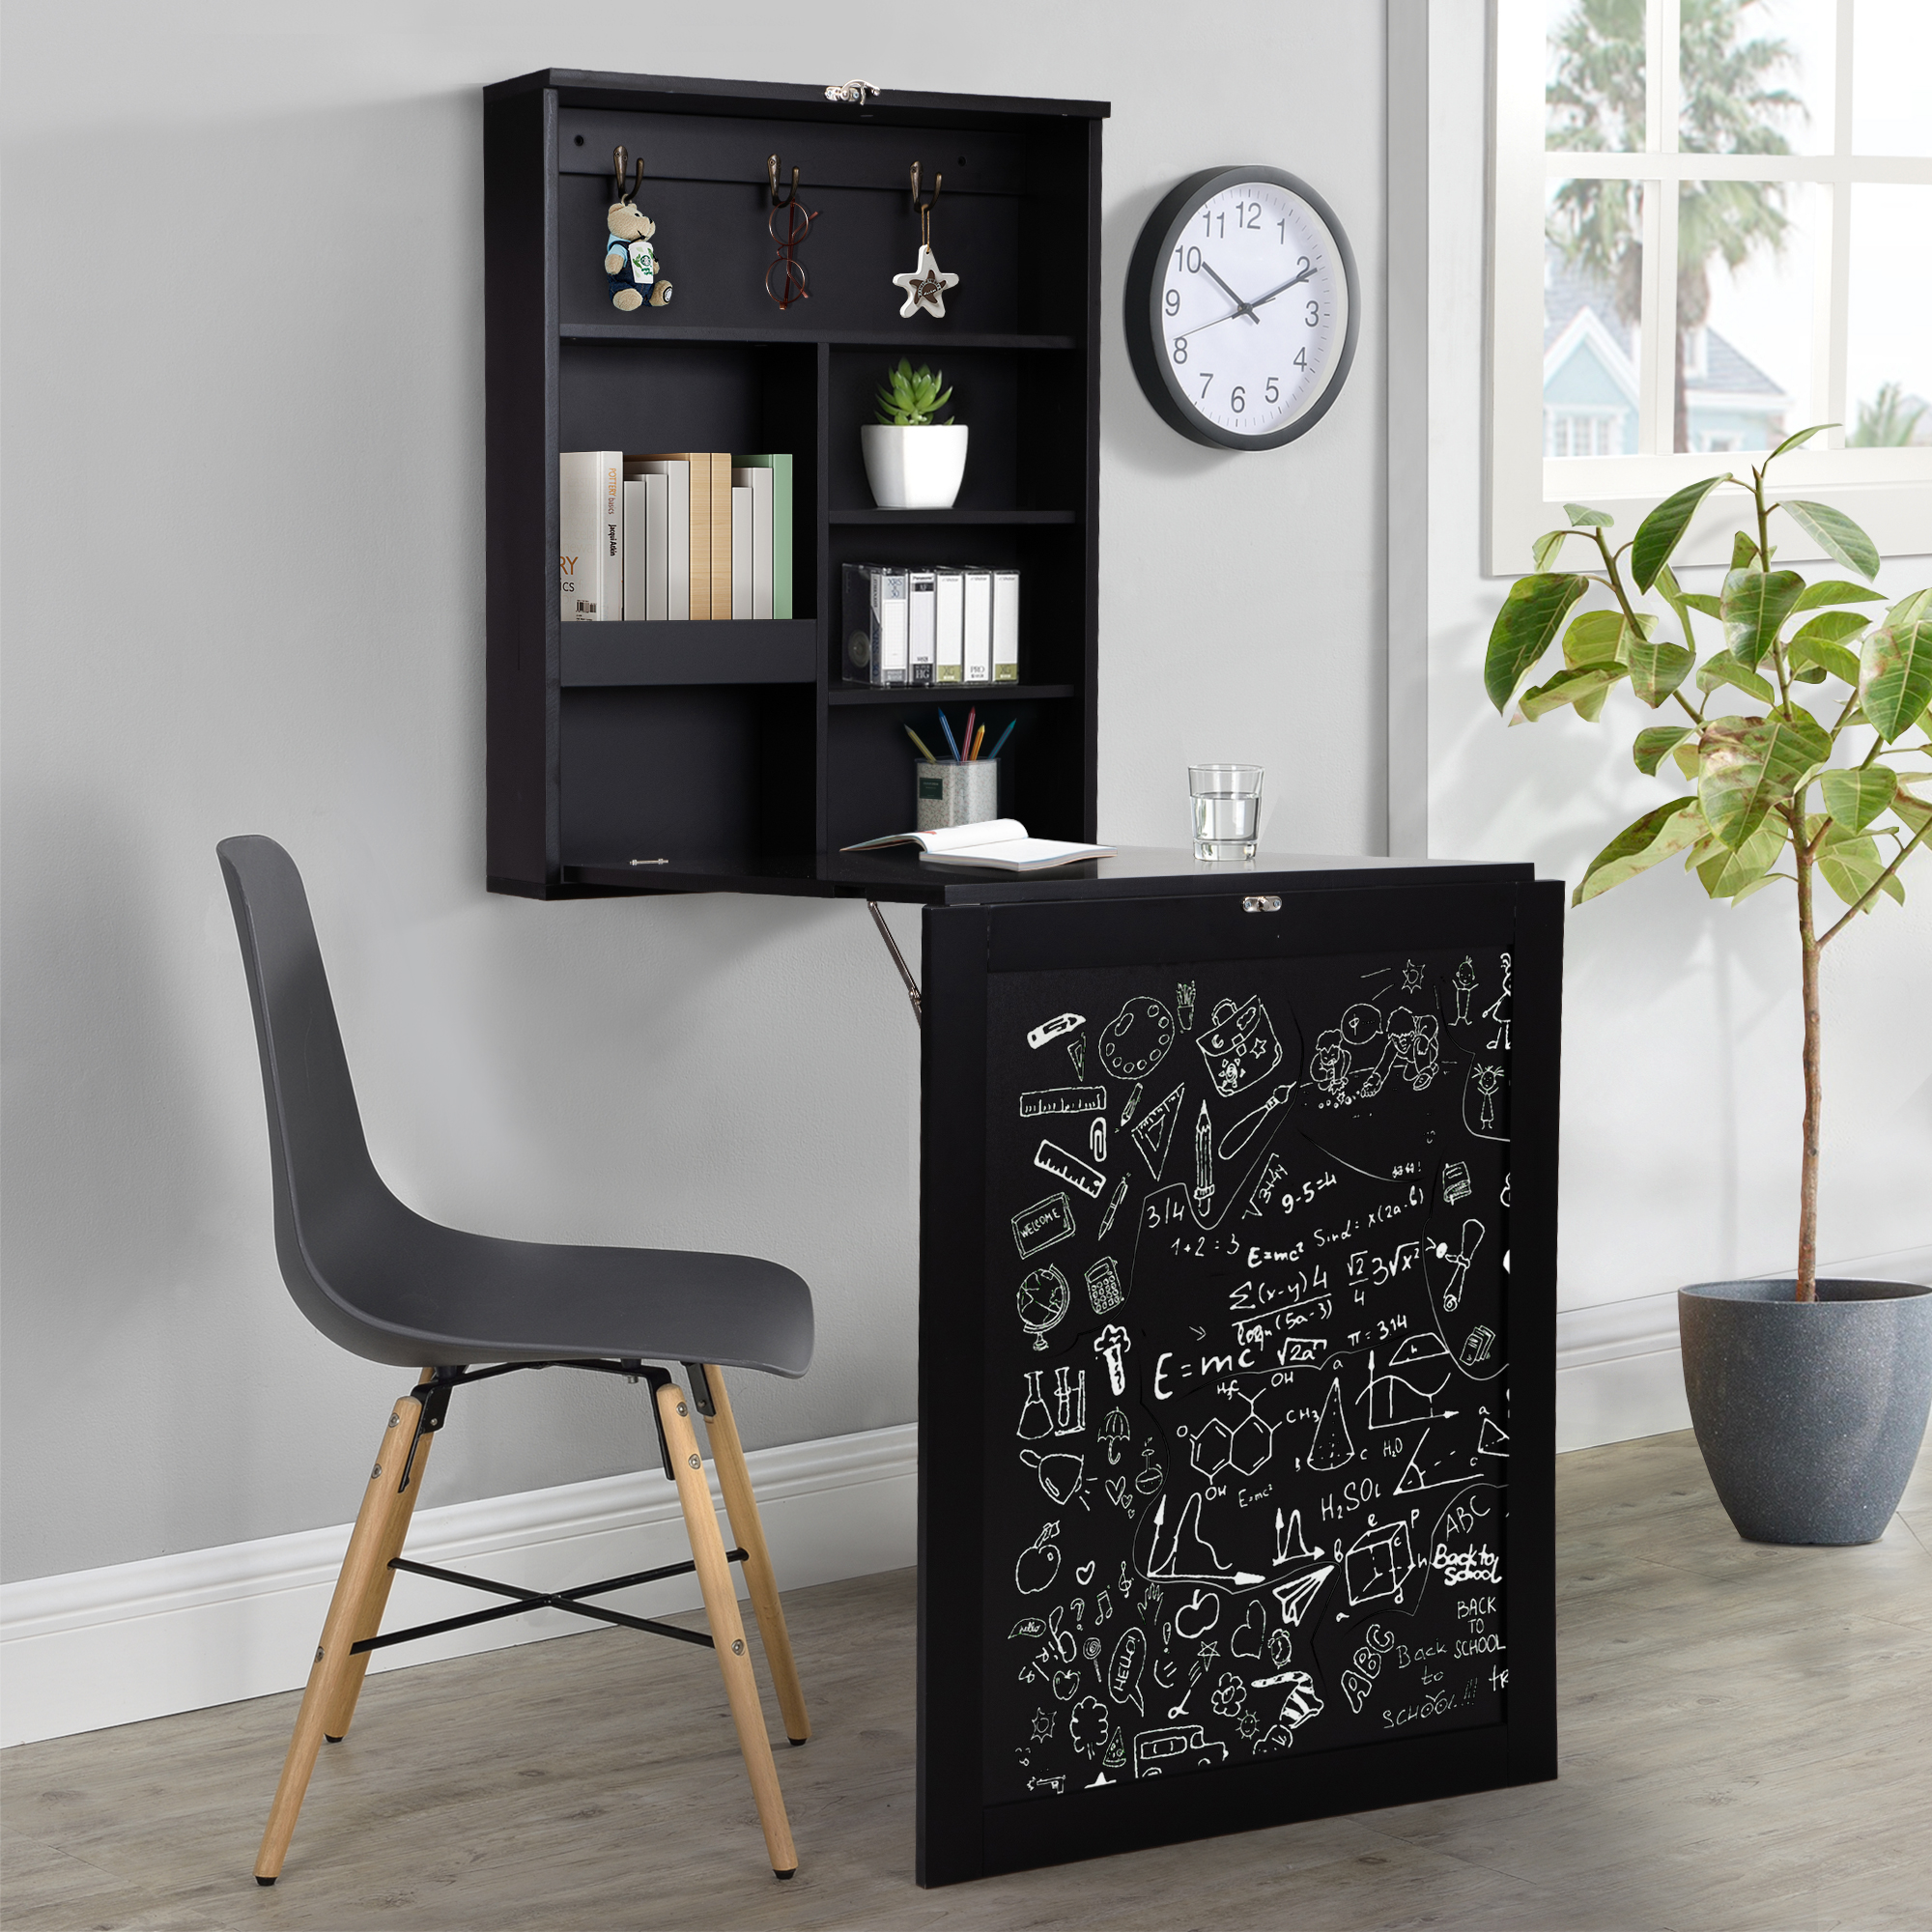 Folding Wooden Wall-Mounted Table Drop-Leaf Desk with Storage Shelves, Black-CASAINC